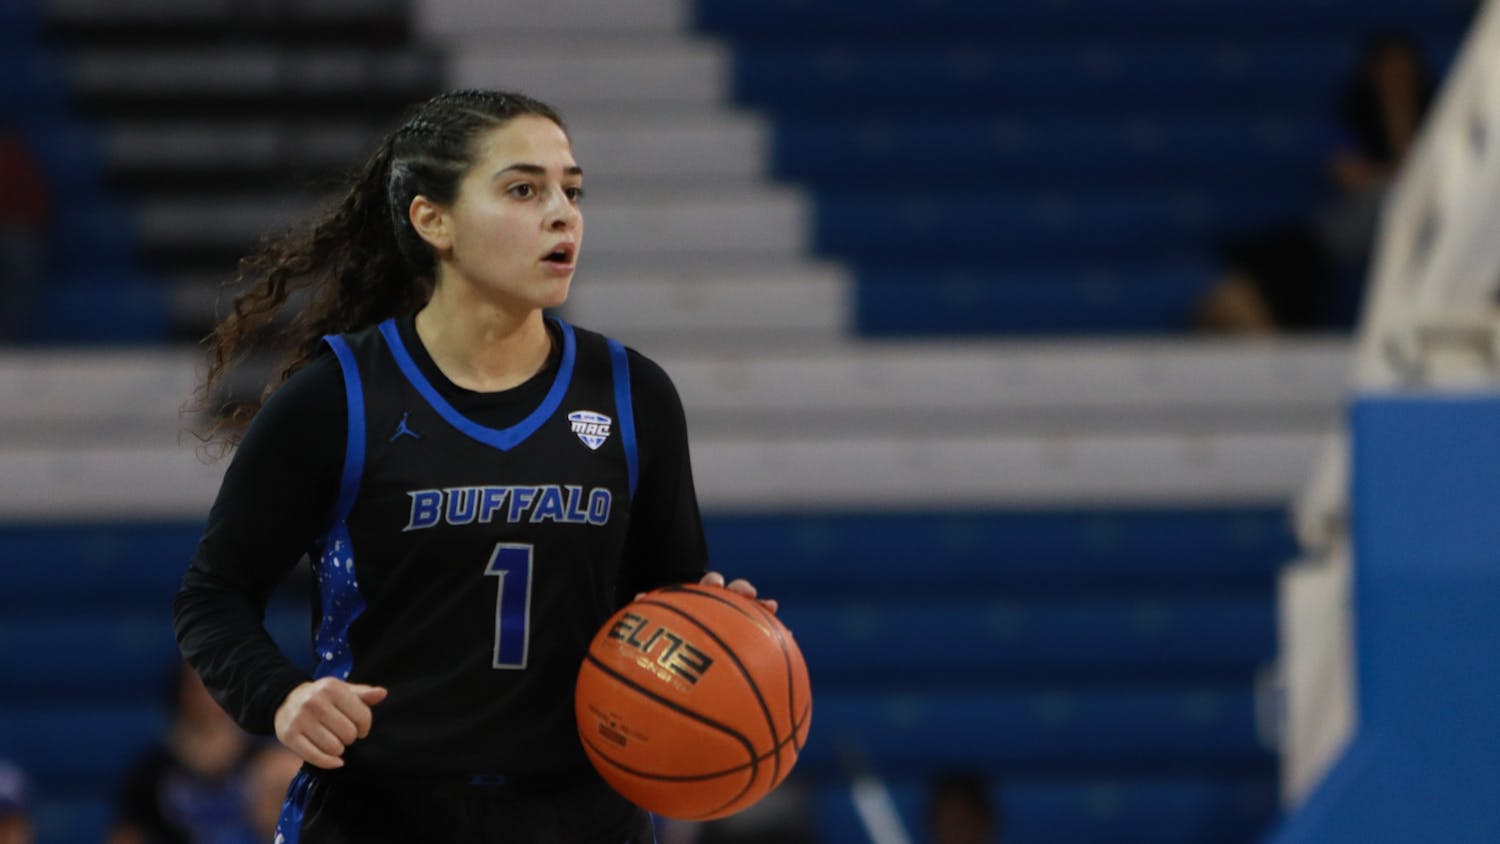 The Bulls led 16-10 at the end of the first quarter after senior guard Rana Elhusseini hit a three-pointer.&nbsp;